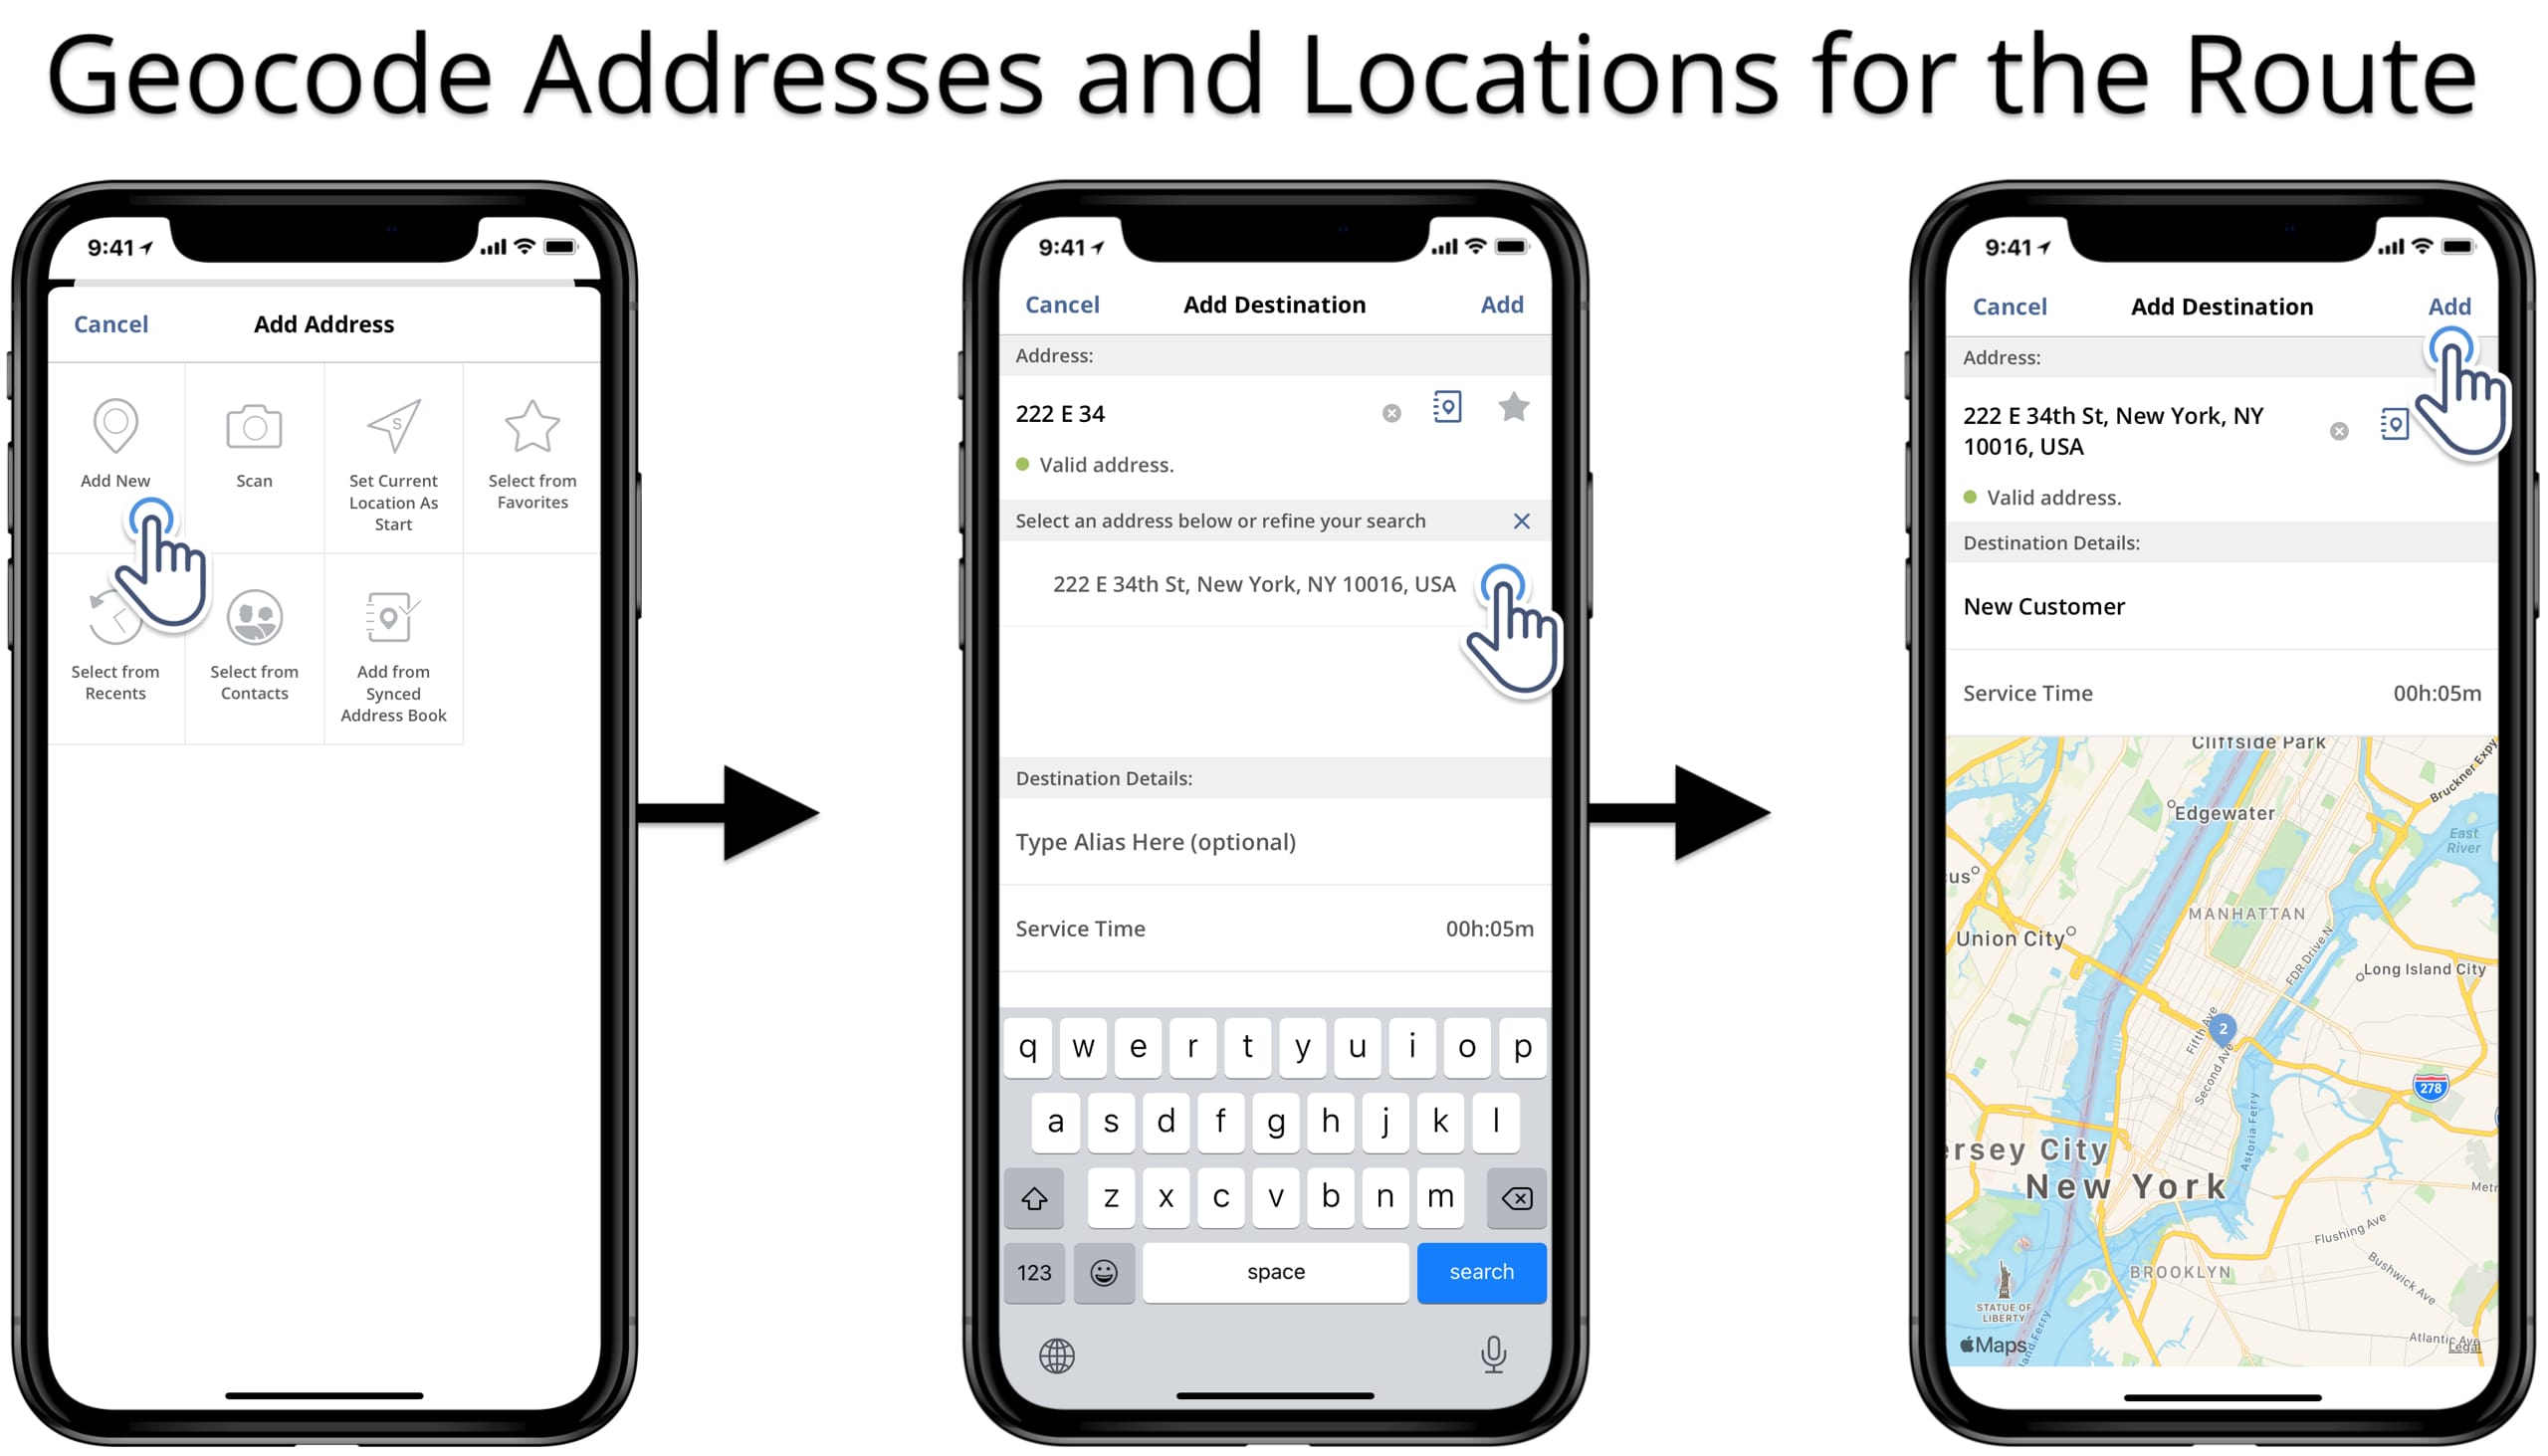 Geocoding addresses and locations on the iOS route planner app to add destinations to the route.